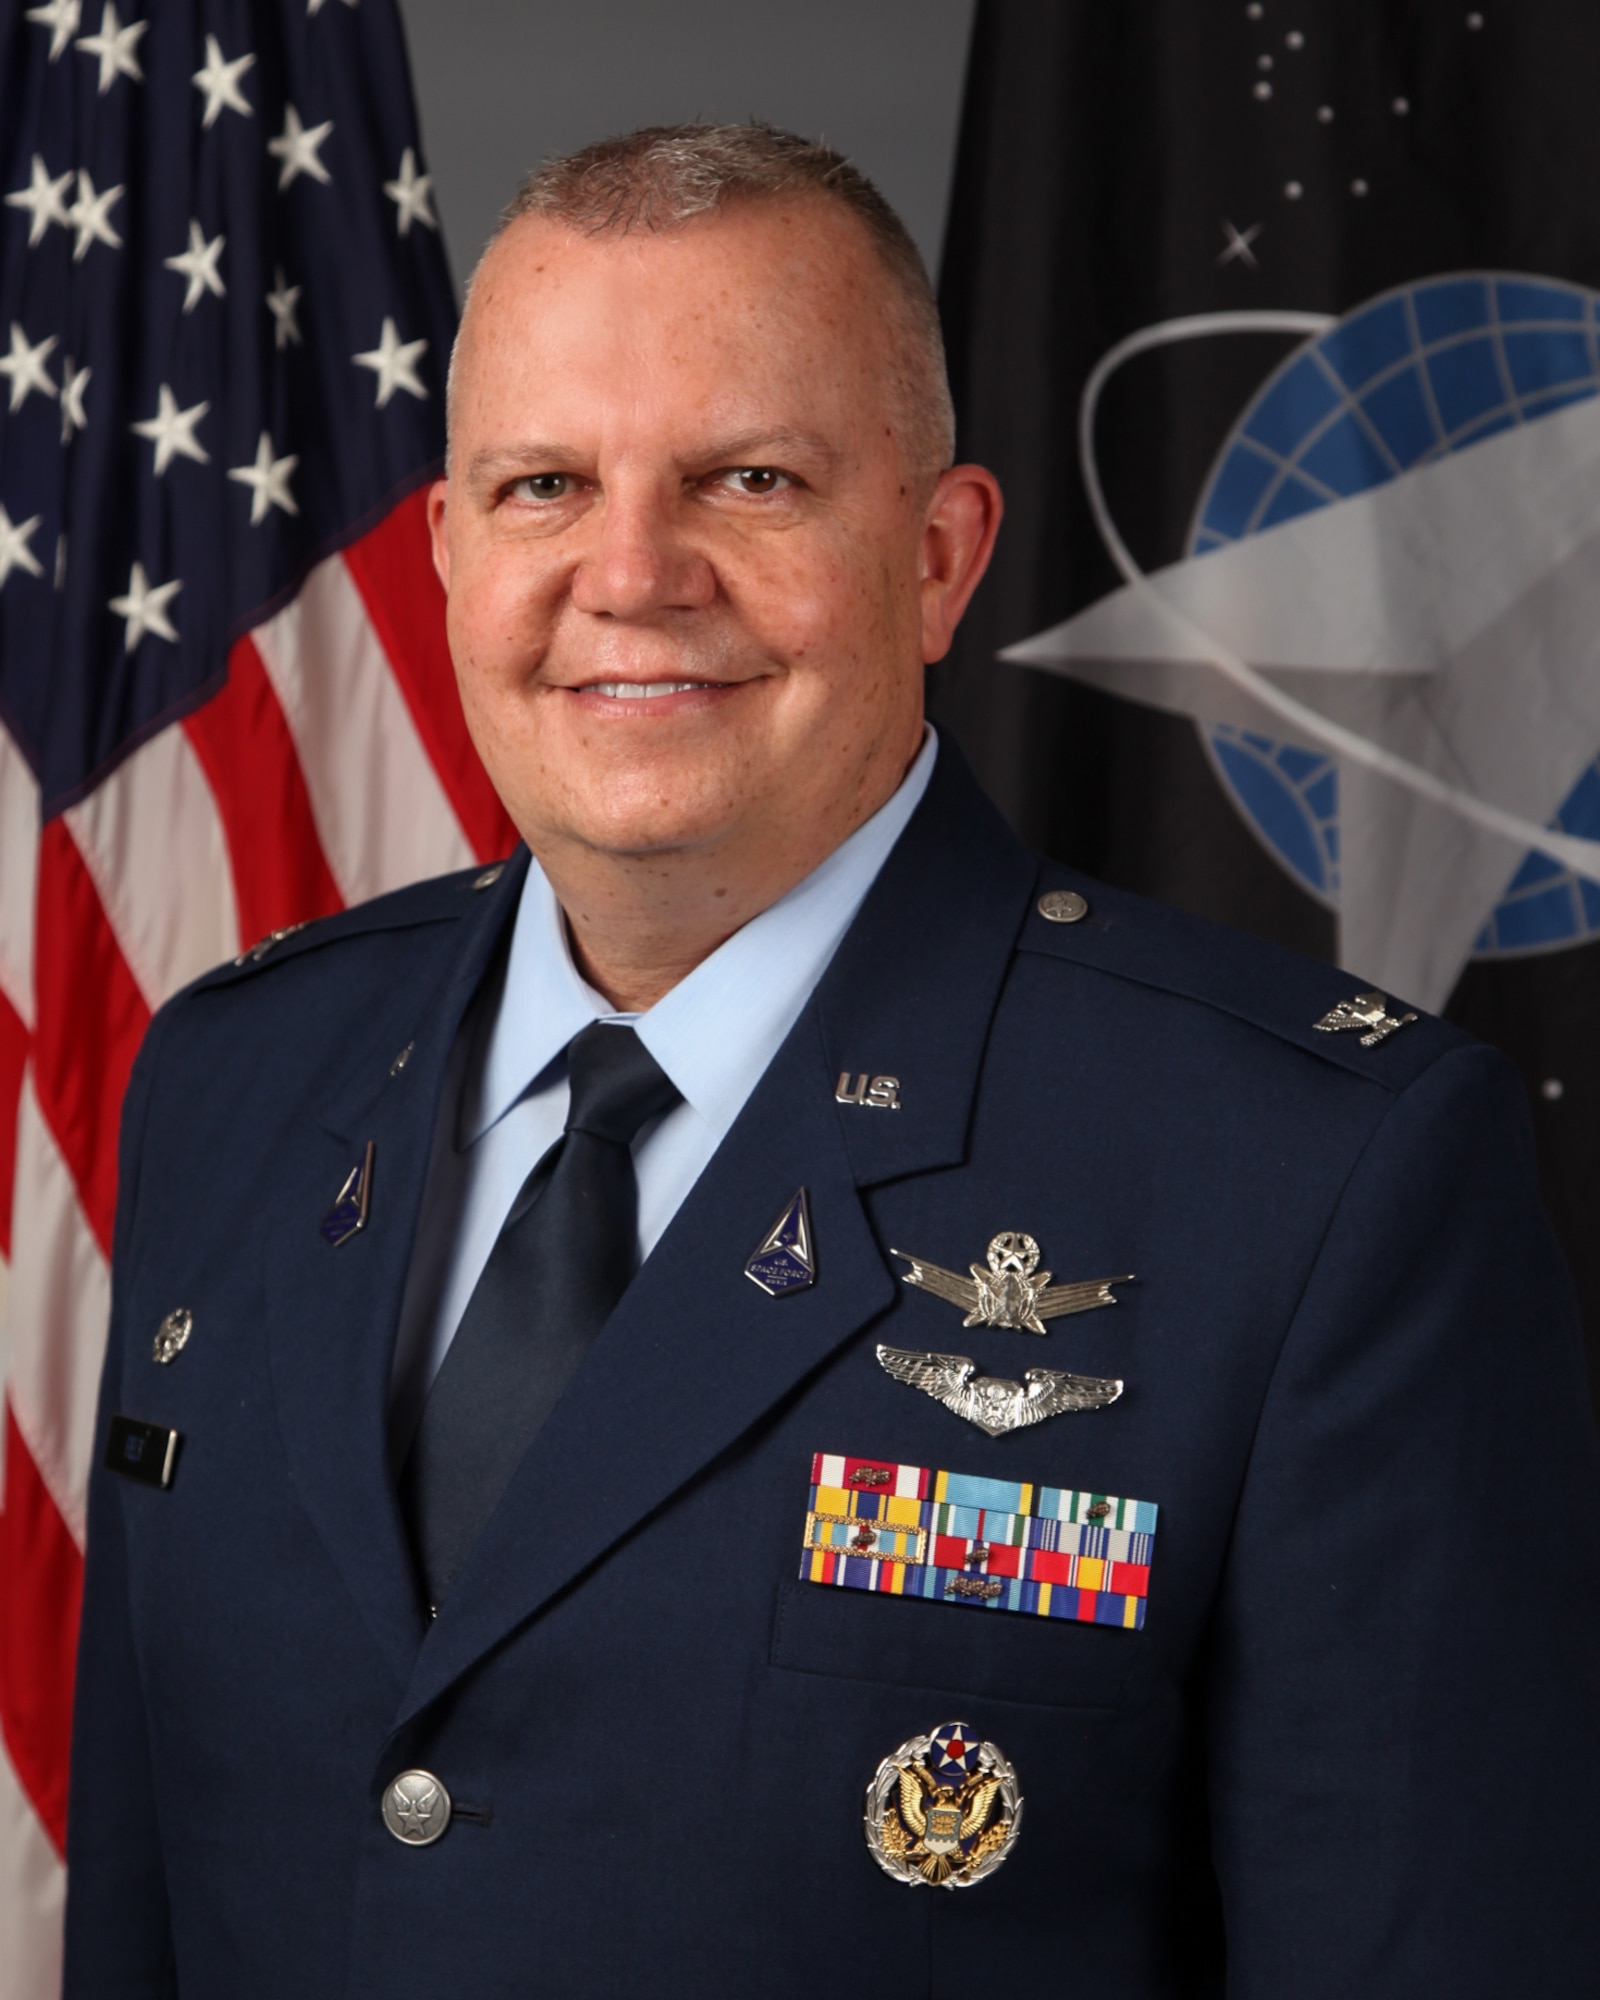 Col. Eric J. Felt is the Air Force Research Laboratory, Space Vehicles Directorate director and commander of the Phillips Research Site, located at Kirtland AFB, N.M. (U.S. Air Force photo)